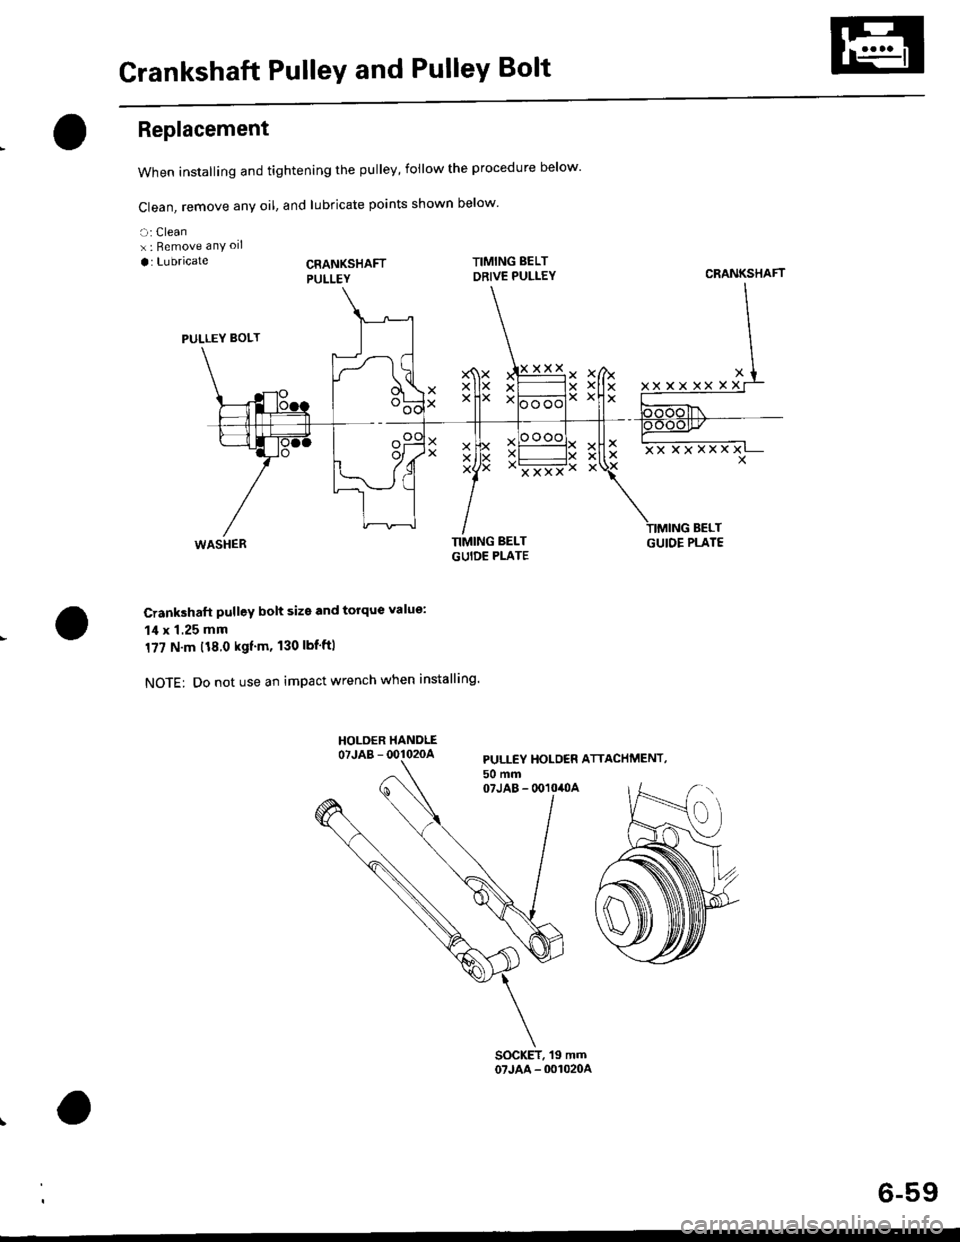 HONDA CIVIC 1999 6.G User Guide Crankshaft PulleY and PulleY Bolt
Replacement
When installing and tightening the pulley, follow the procedure below
Clean, remove any oil, and lubricate points shown below
a: Cleanx : Bemove anY oll
